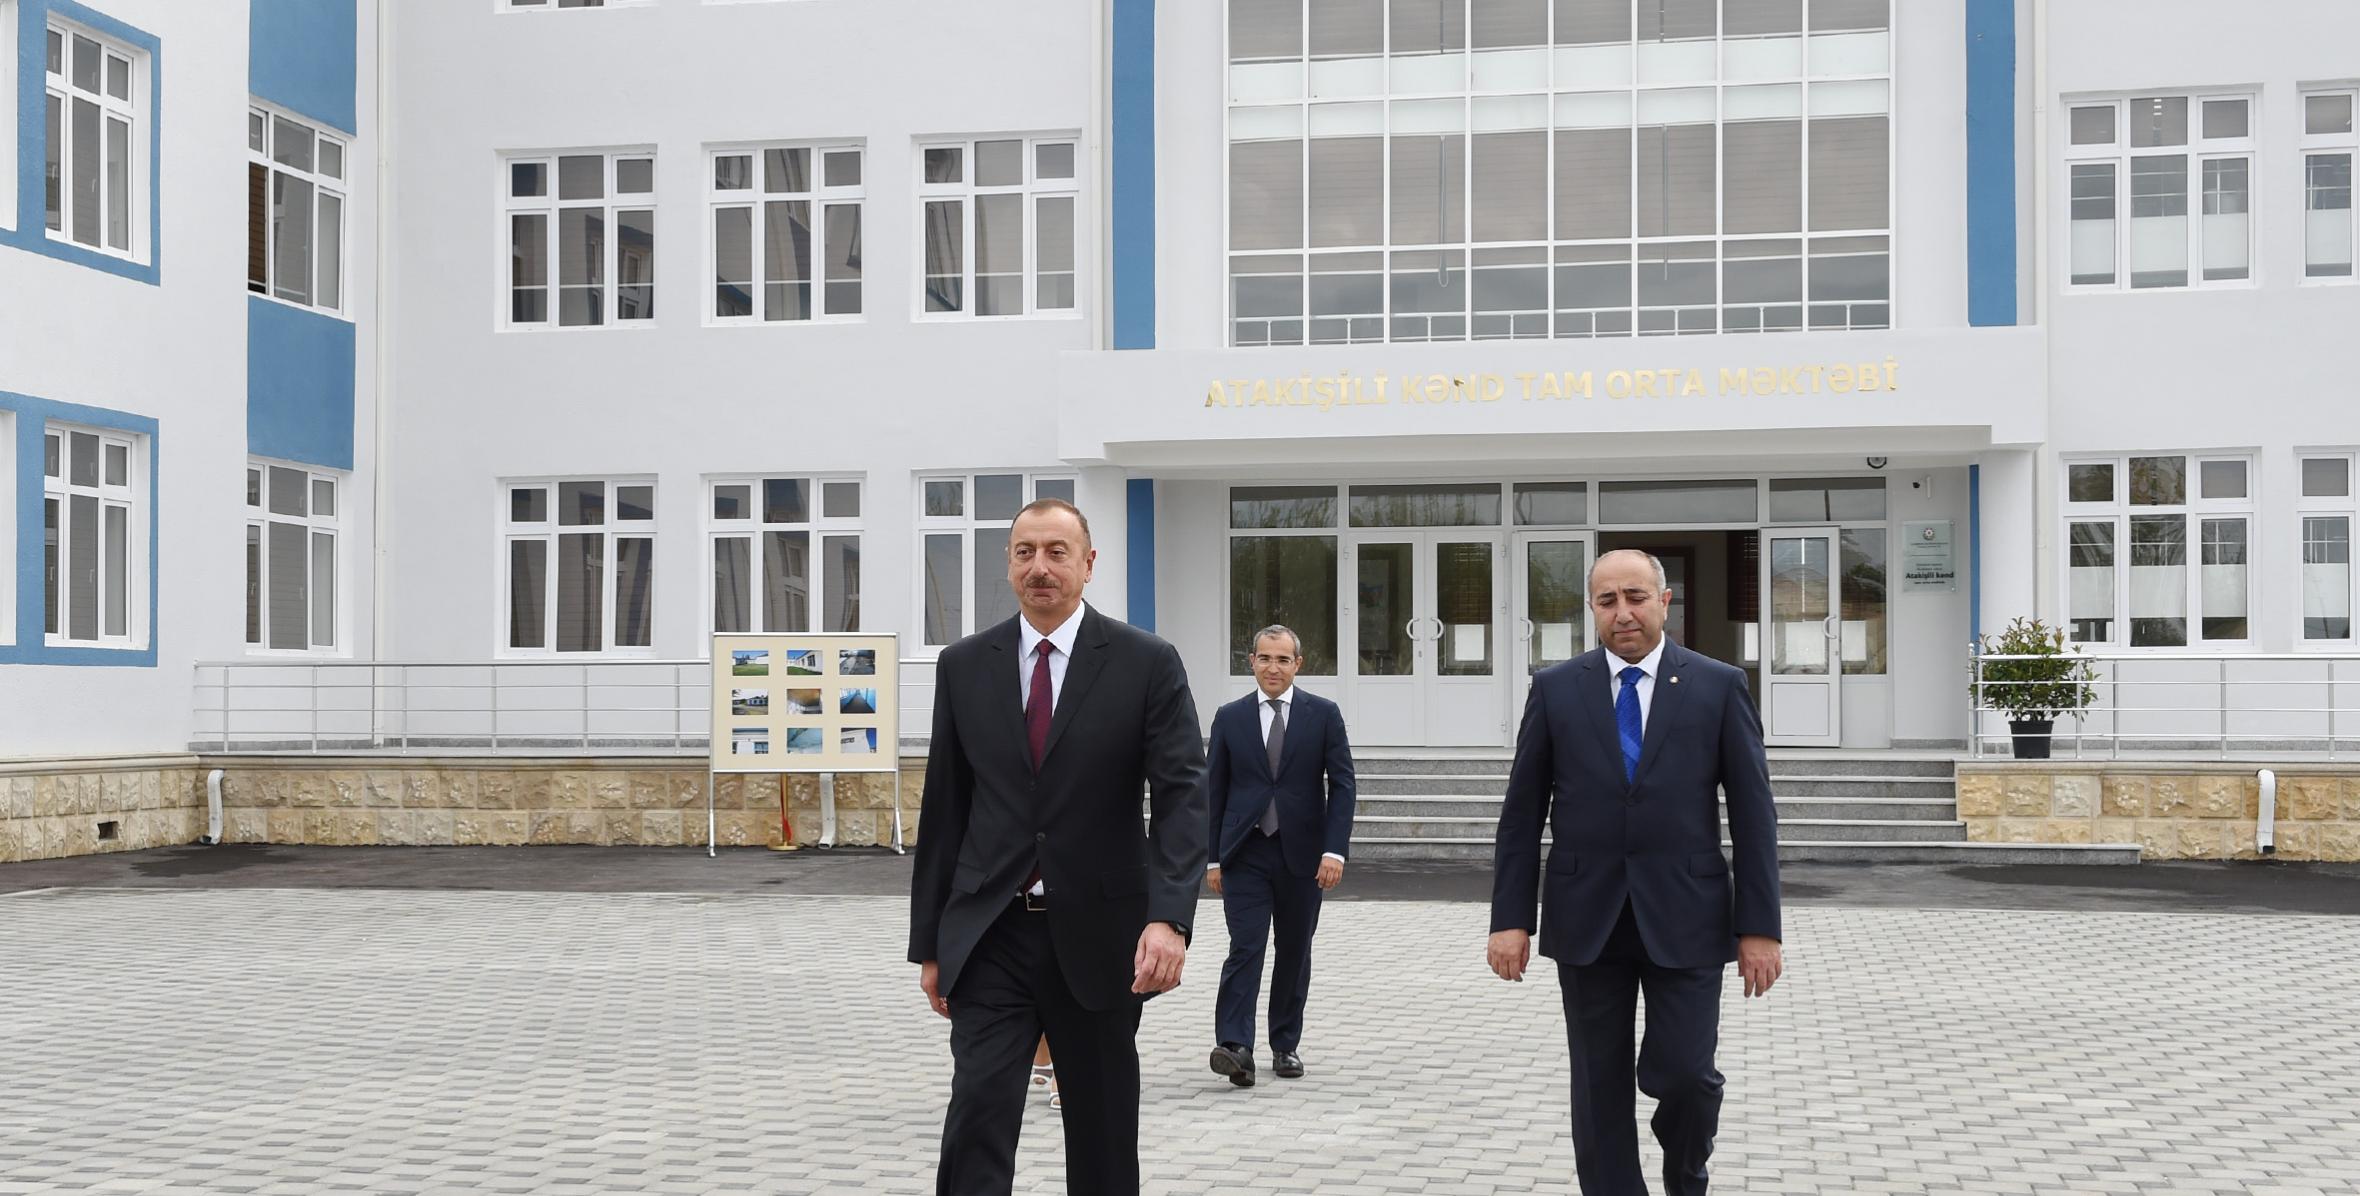 Ilham Aliyev attended the opening of a secondary school in Atakishili village in Kurdamir